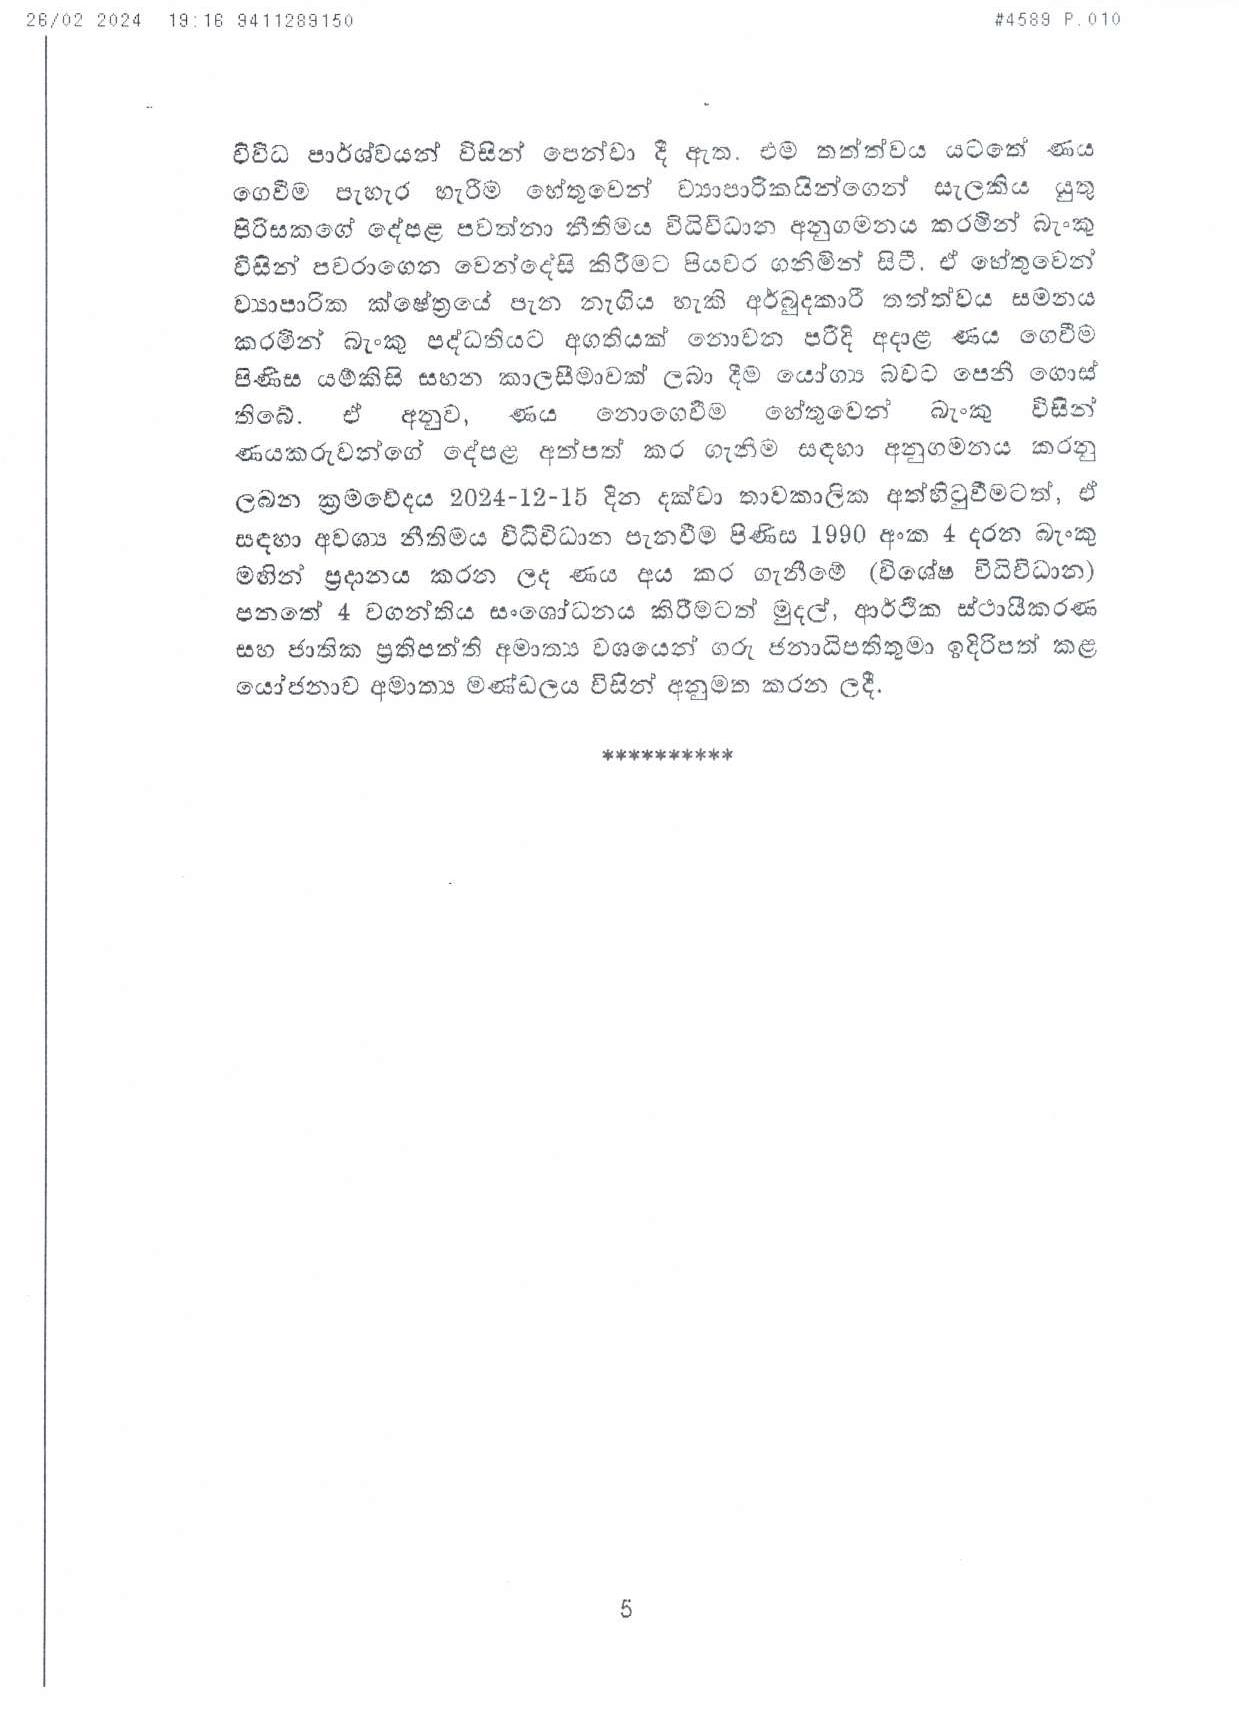 Cabinet Decision on 26.02.2024 page 005